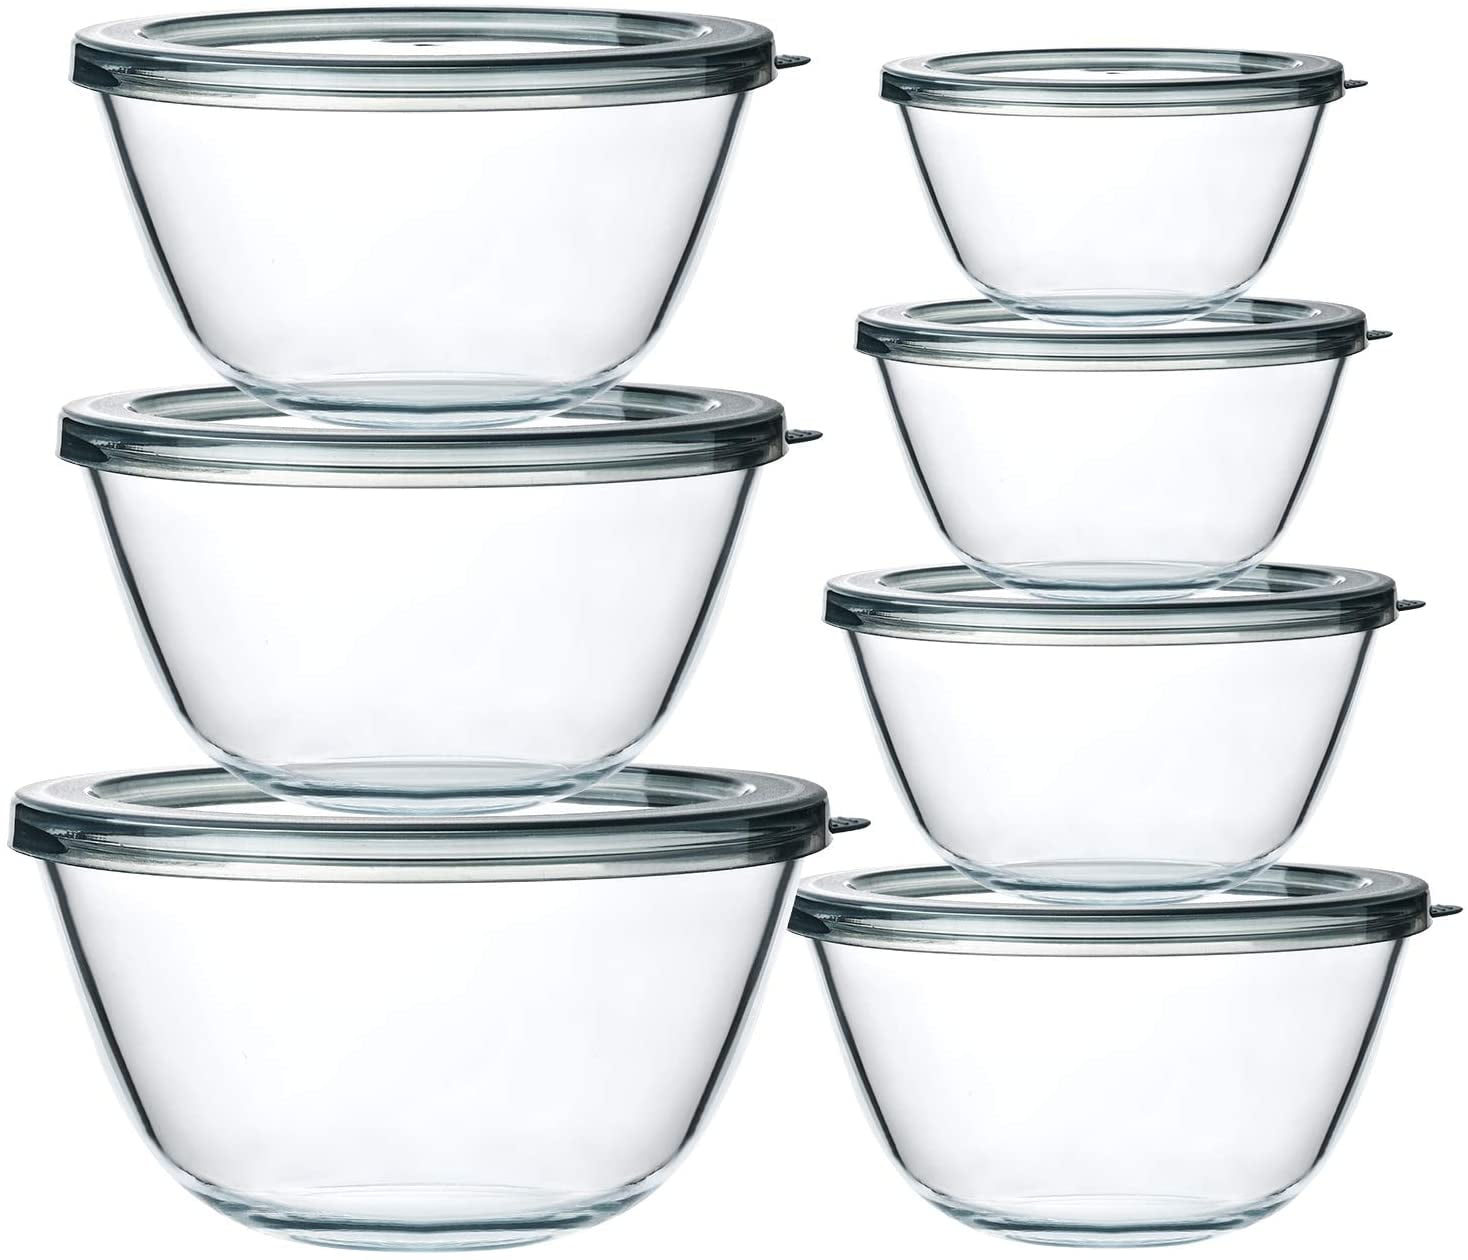 14-Piece Glass Bowls with Lids, Glass Salad Bowls Set - for Baking